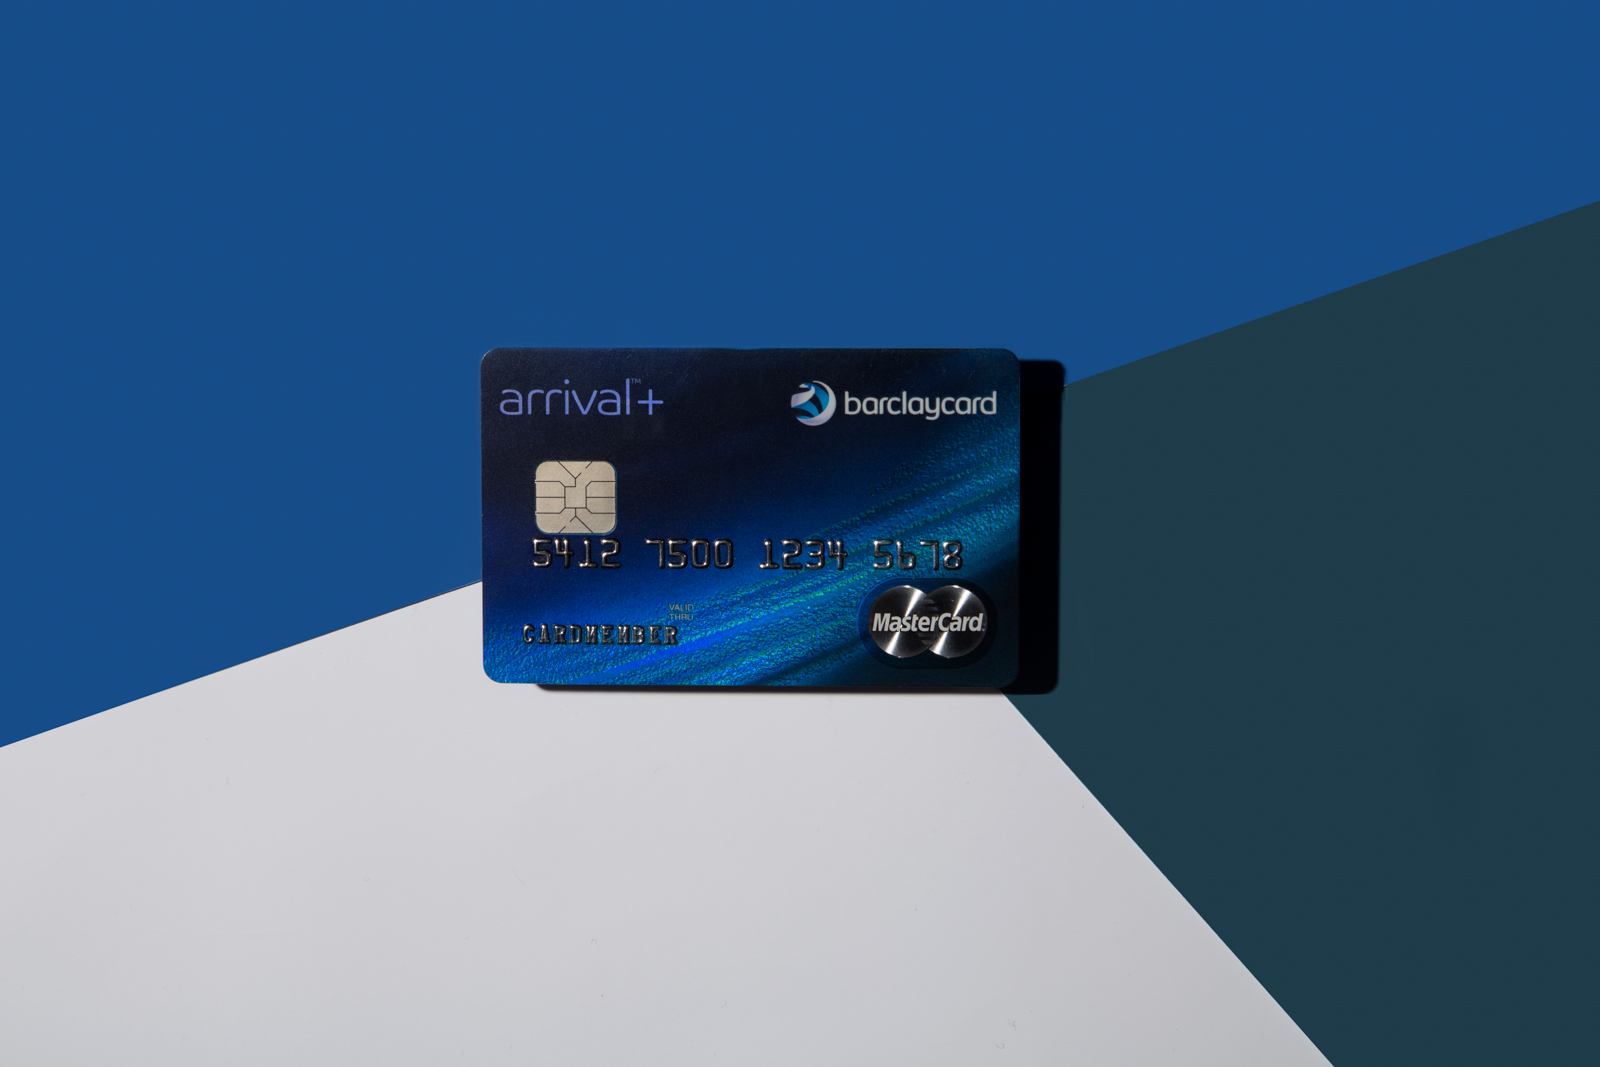 Barclaycards with the Best Rewards Learn About Them Here